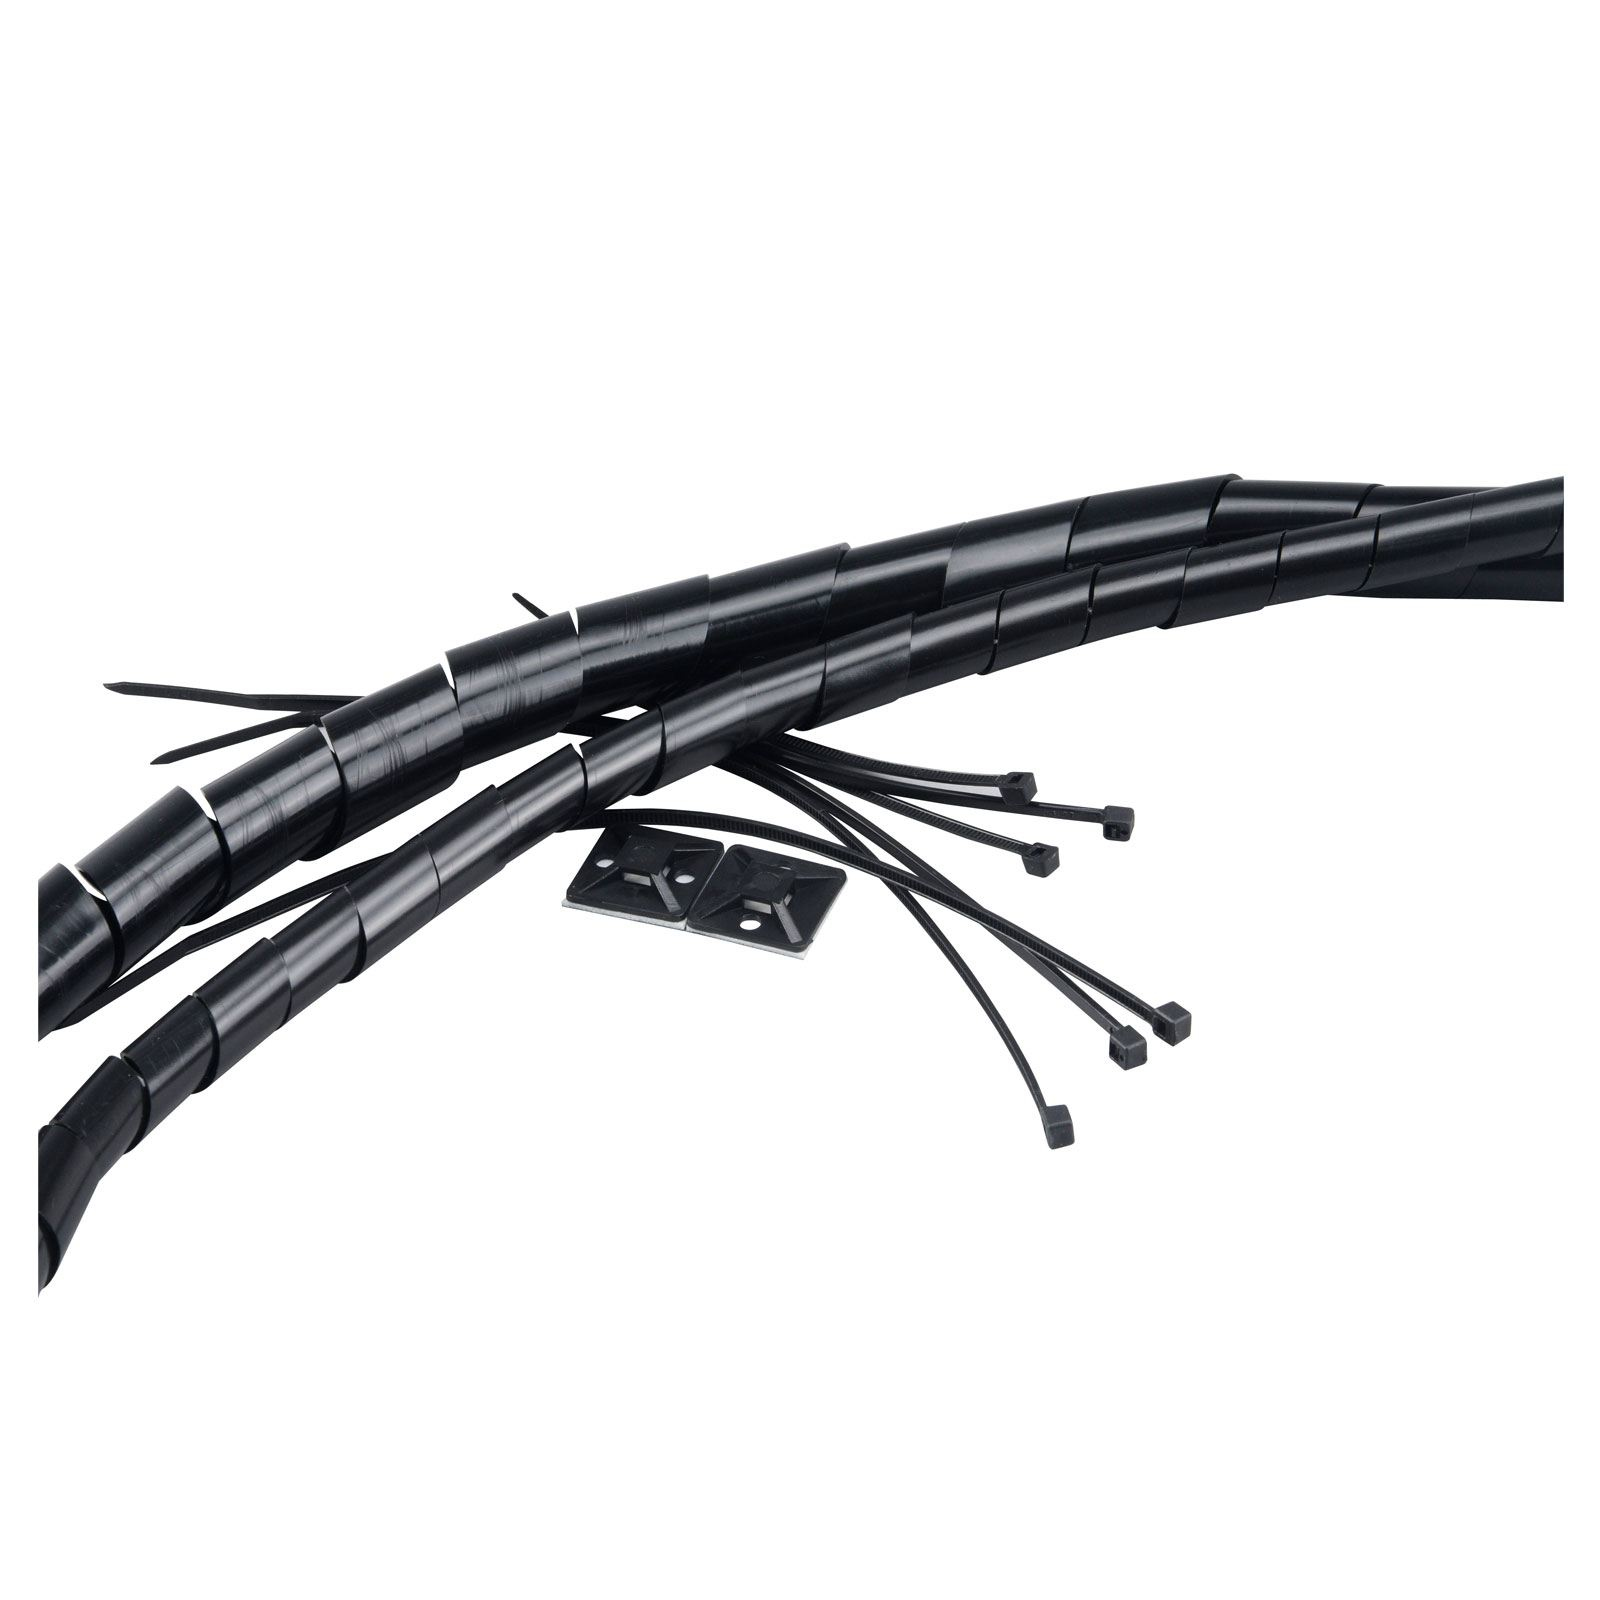 Akasa black cable management kit, spiral wrap, cable ties, cable clamps